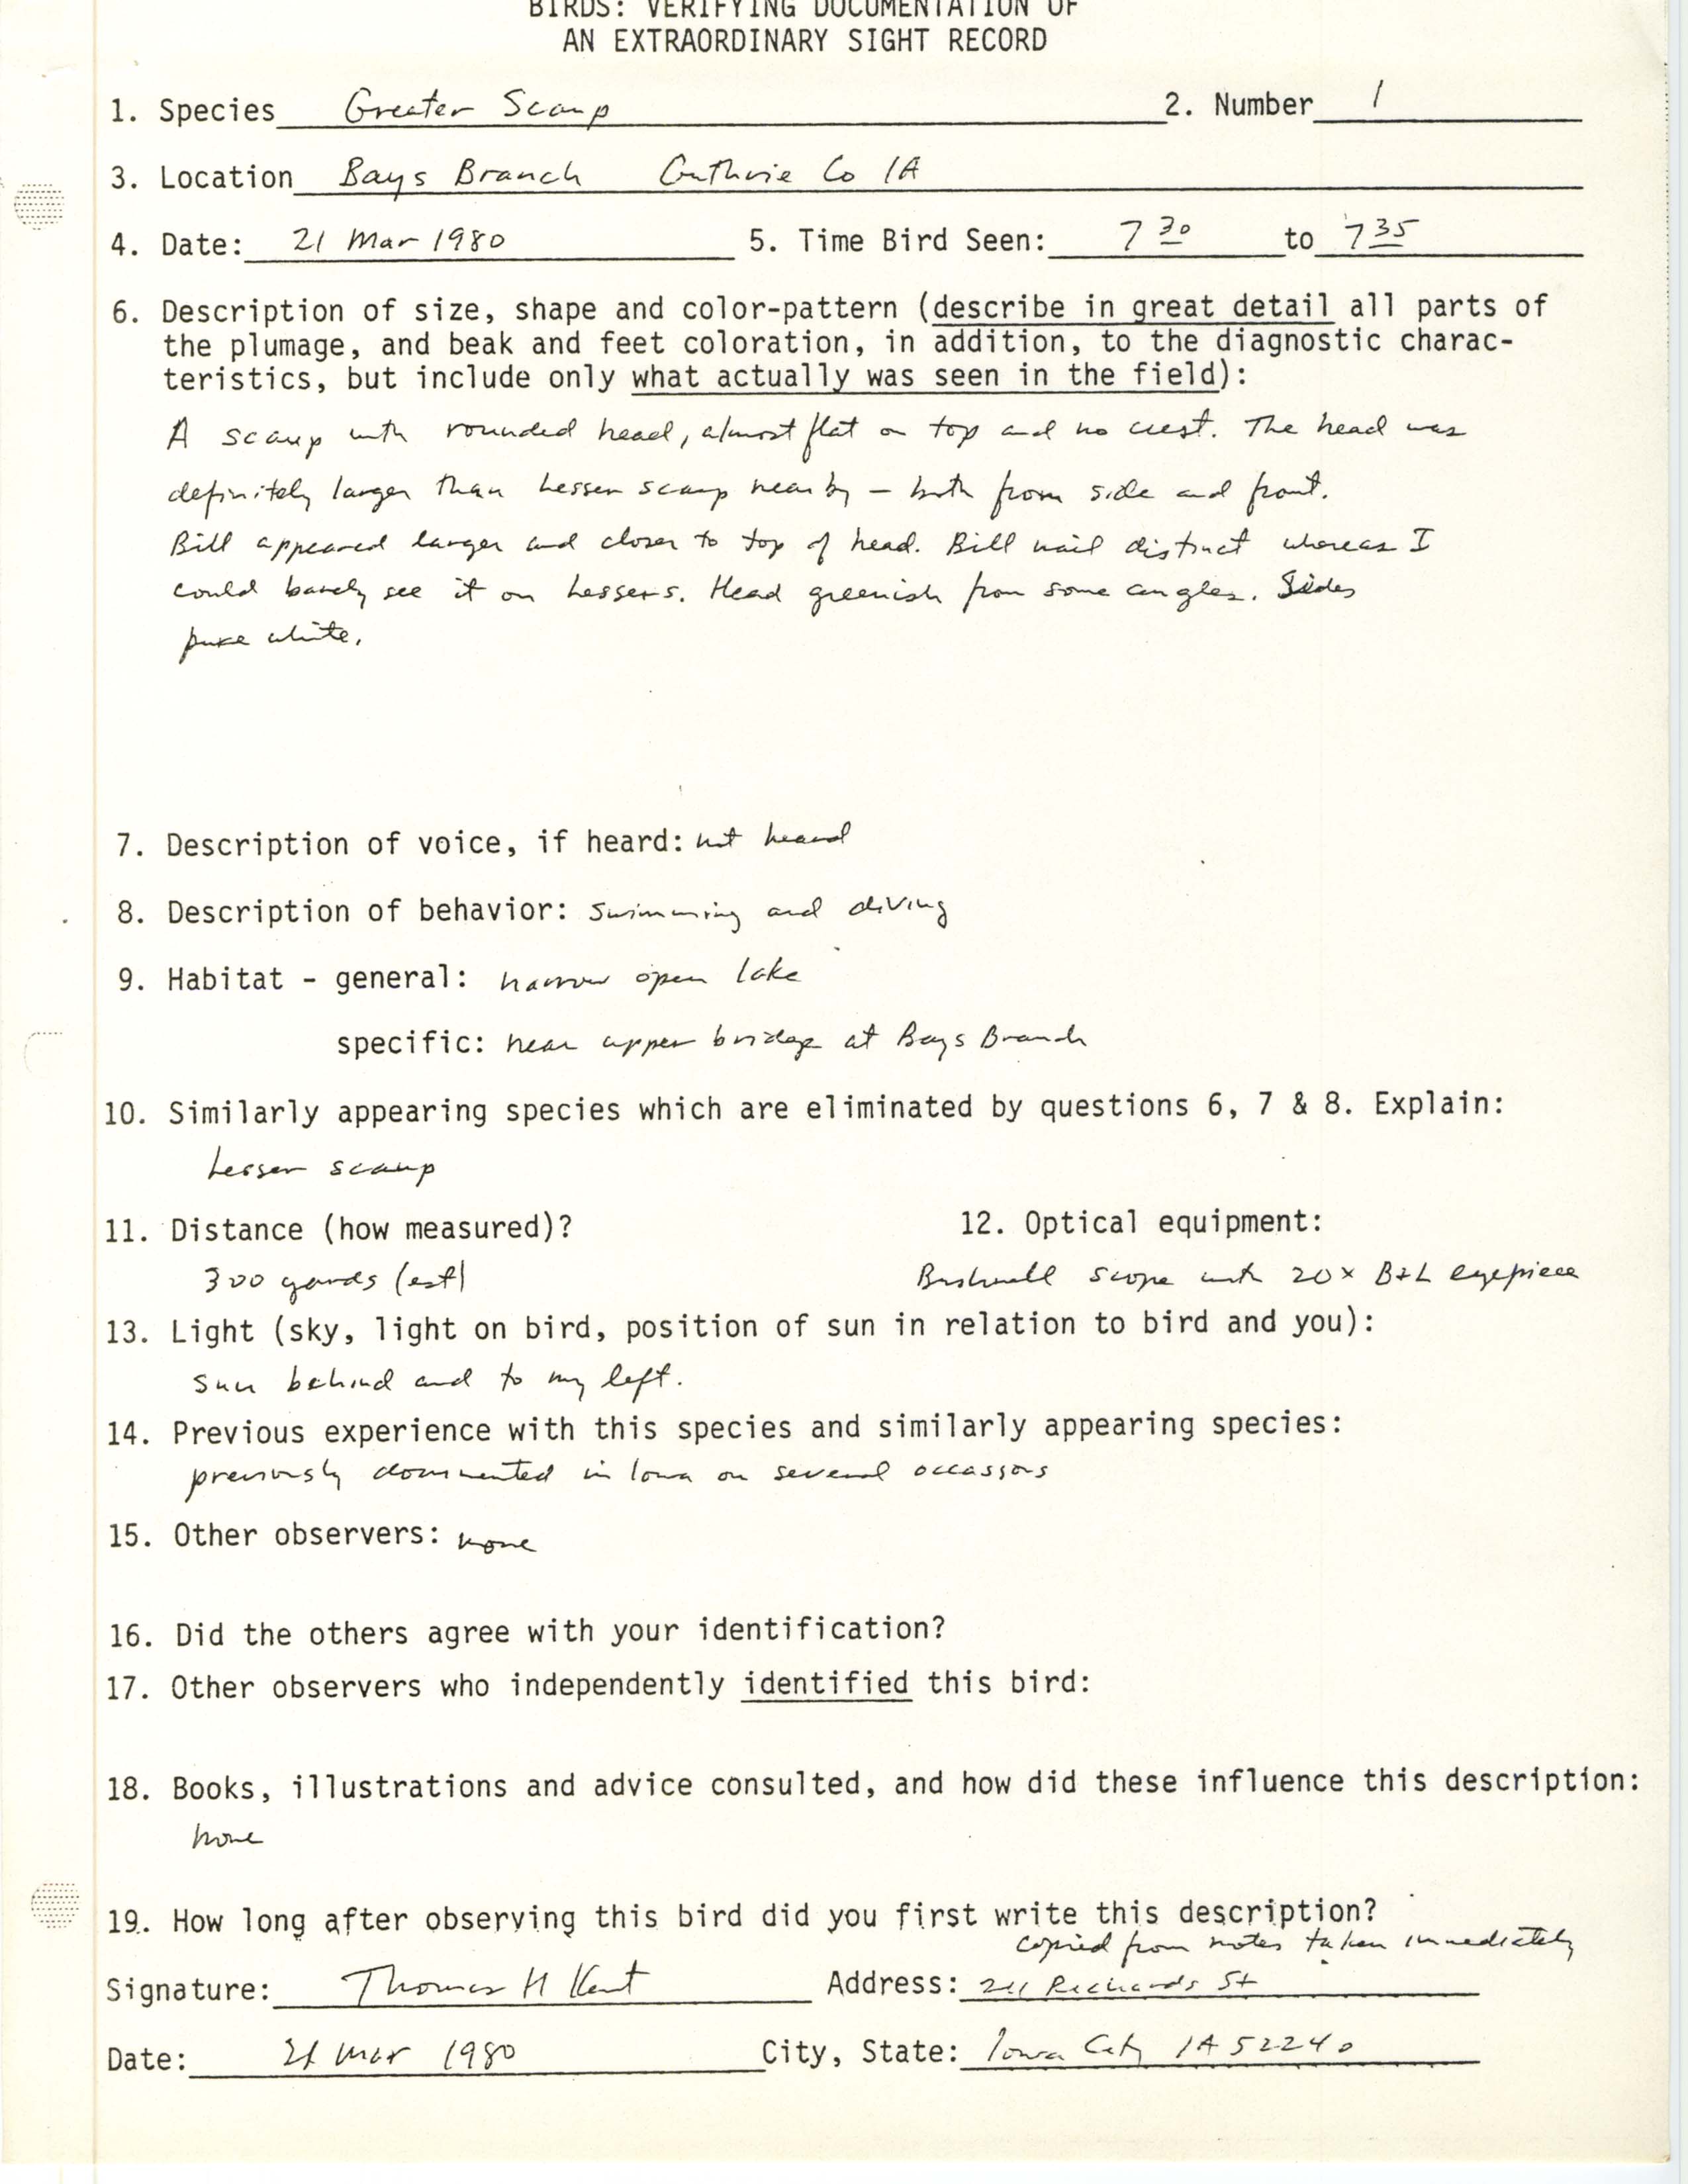 Rare bird documentation form for Greater Scaup at Bays Branch, 1980